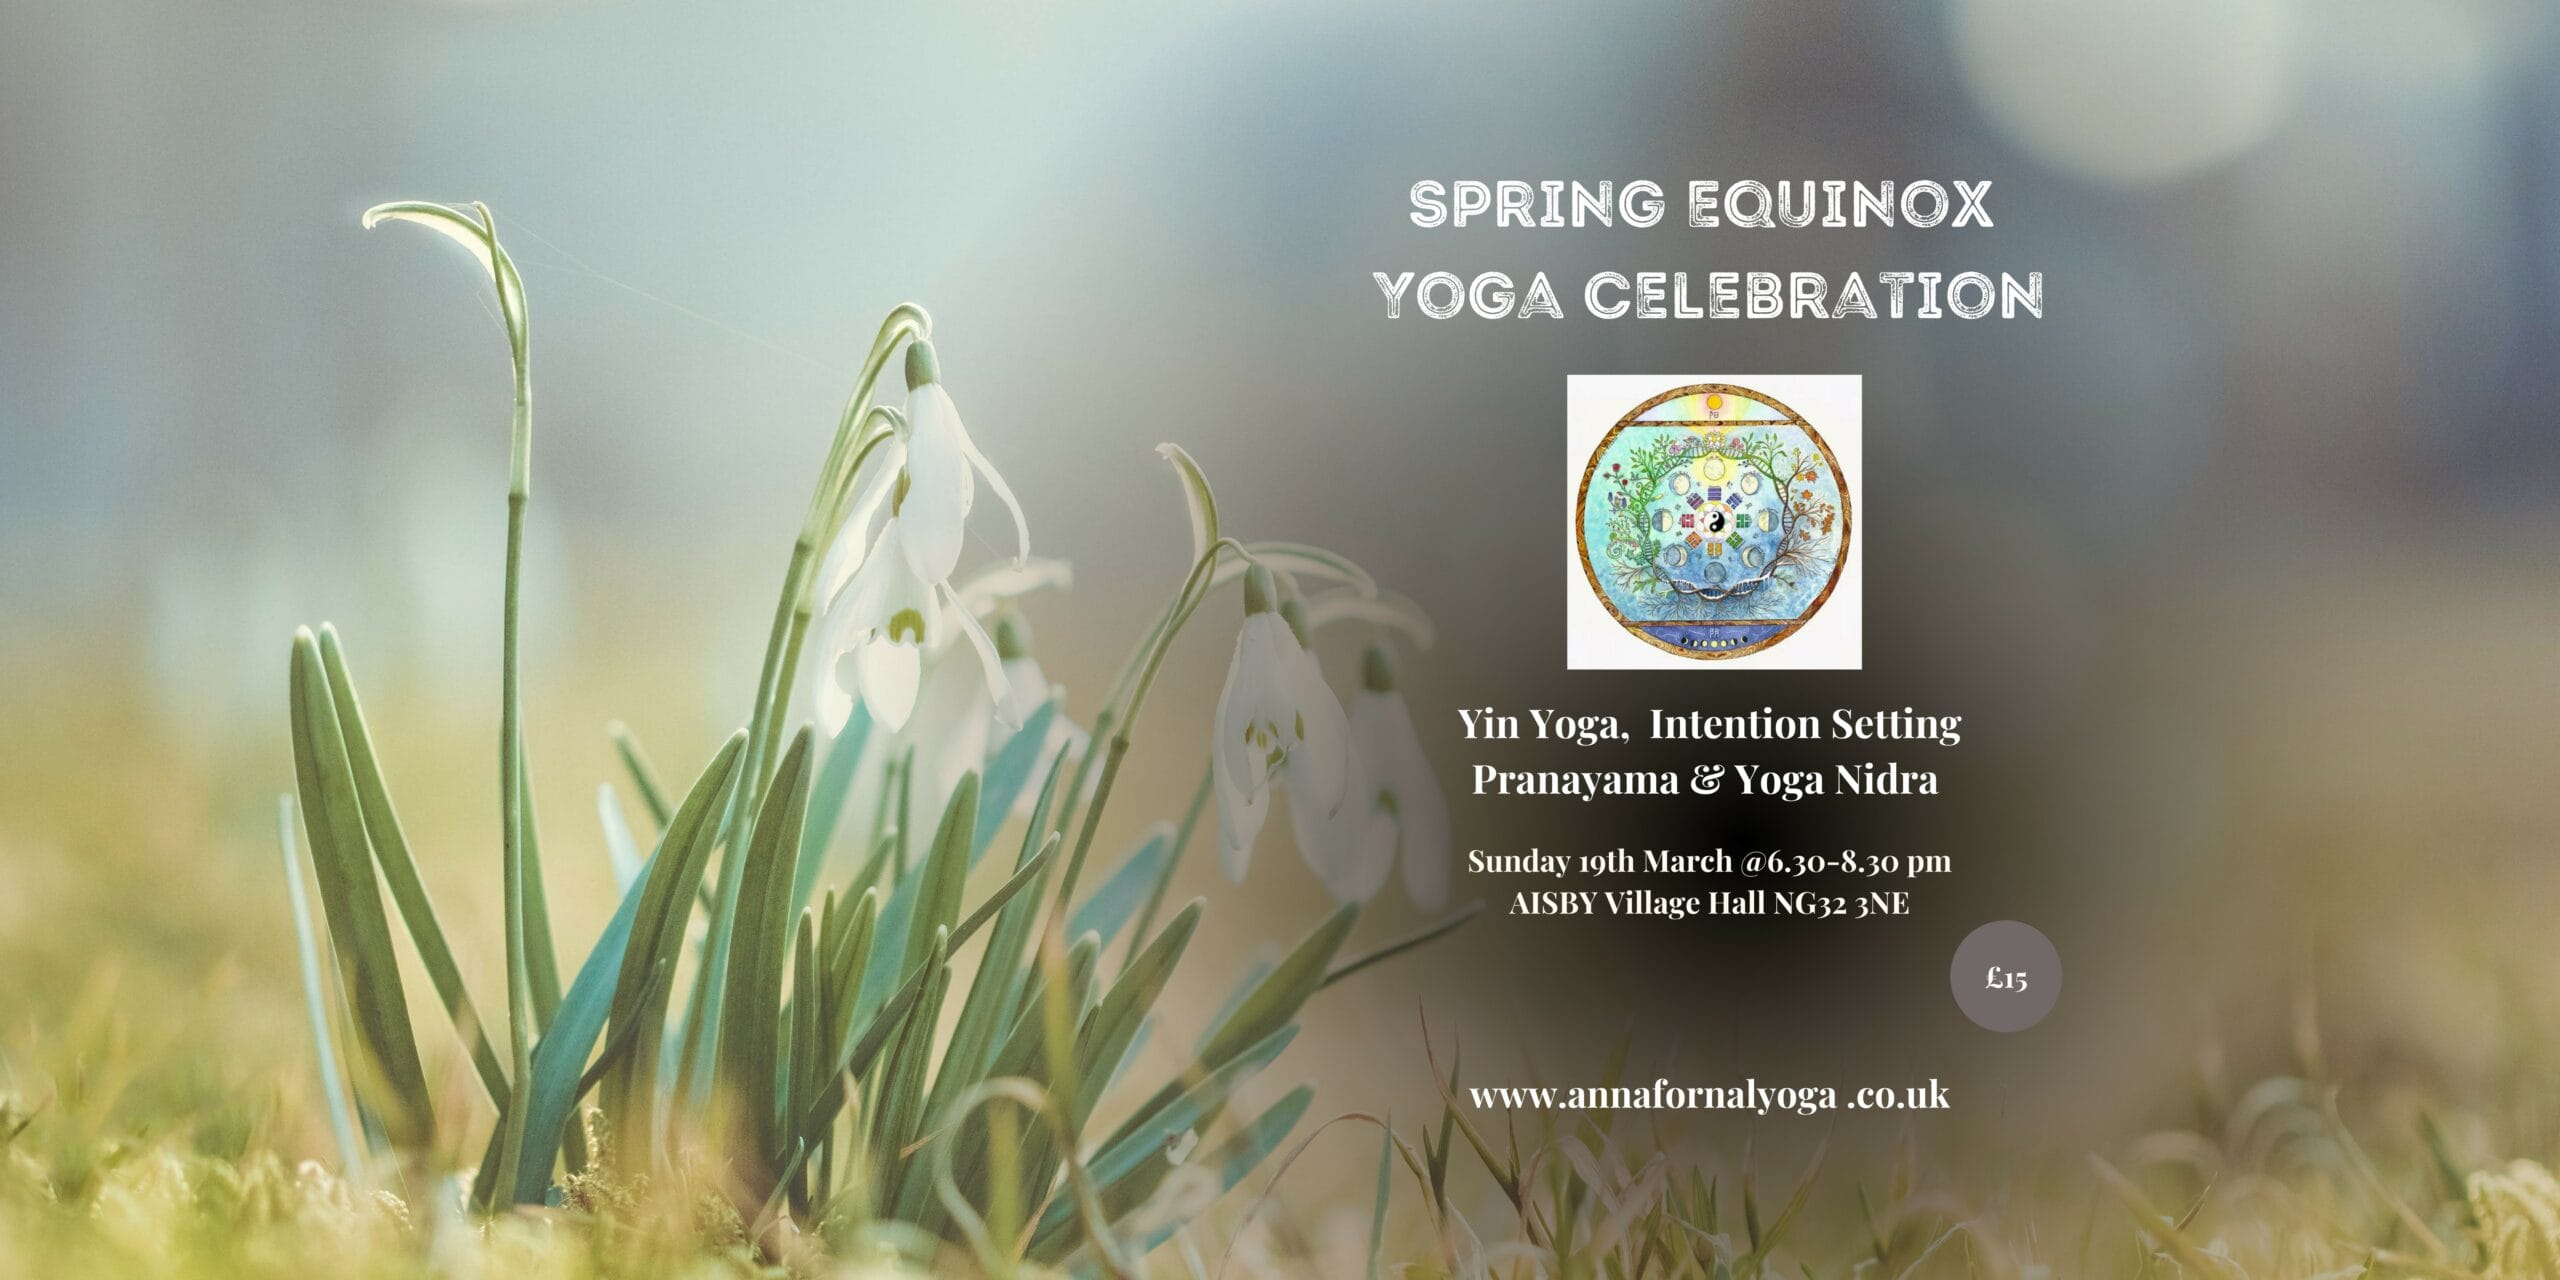 SPRING EQUINOX YIN YOGA EVENT 19th March 23@6.30-8.30pm